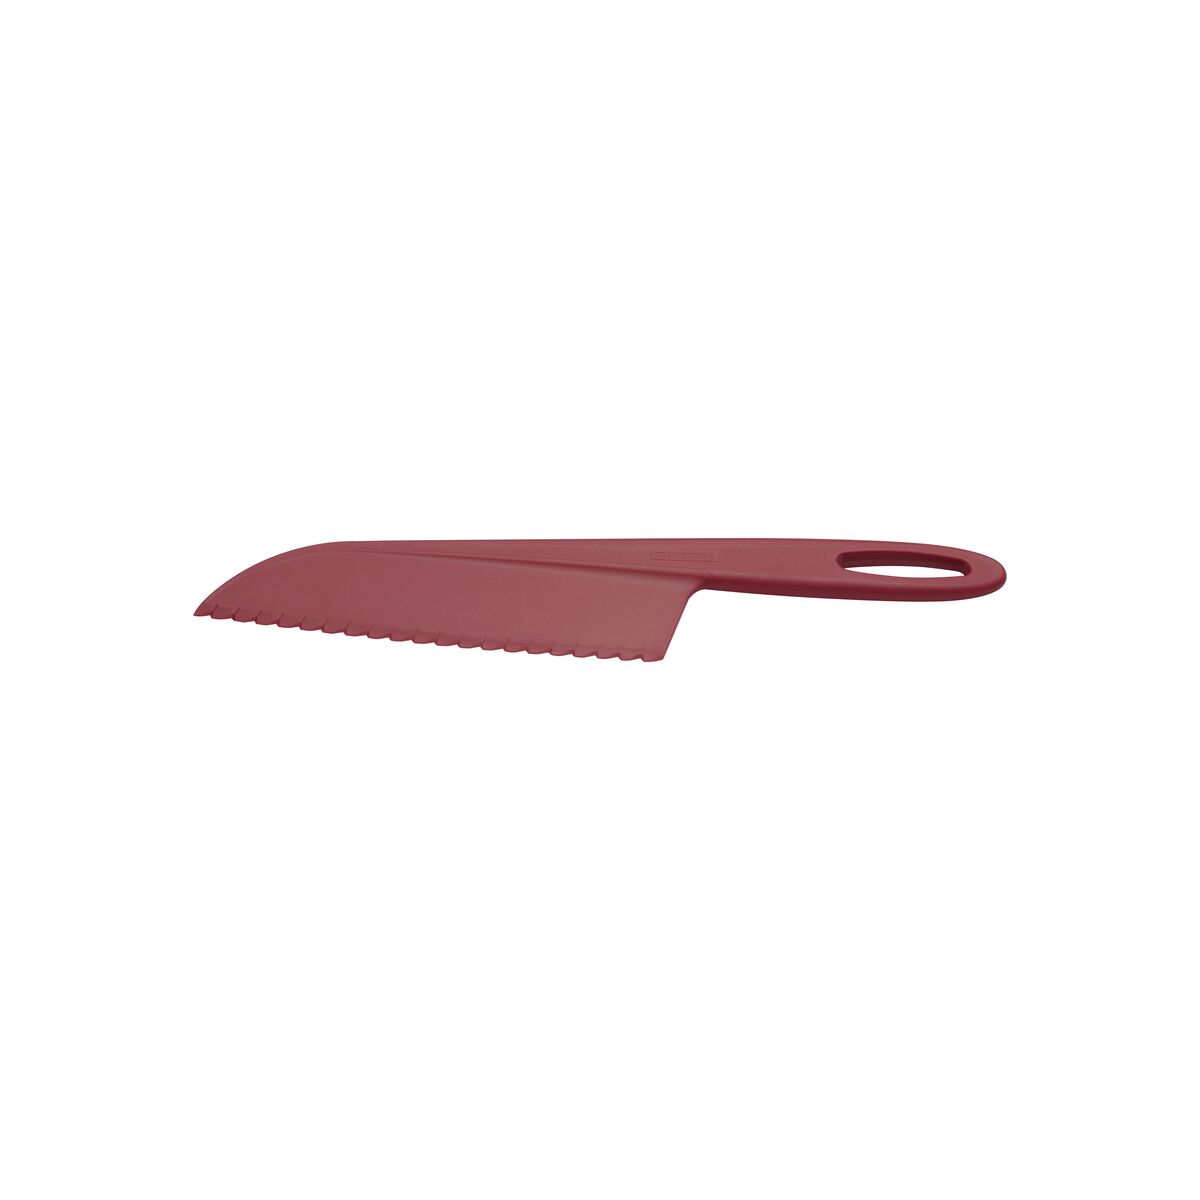 Tramontina Ability Red Nylon Pie, Cake and Salad Knife